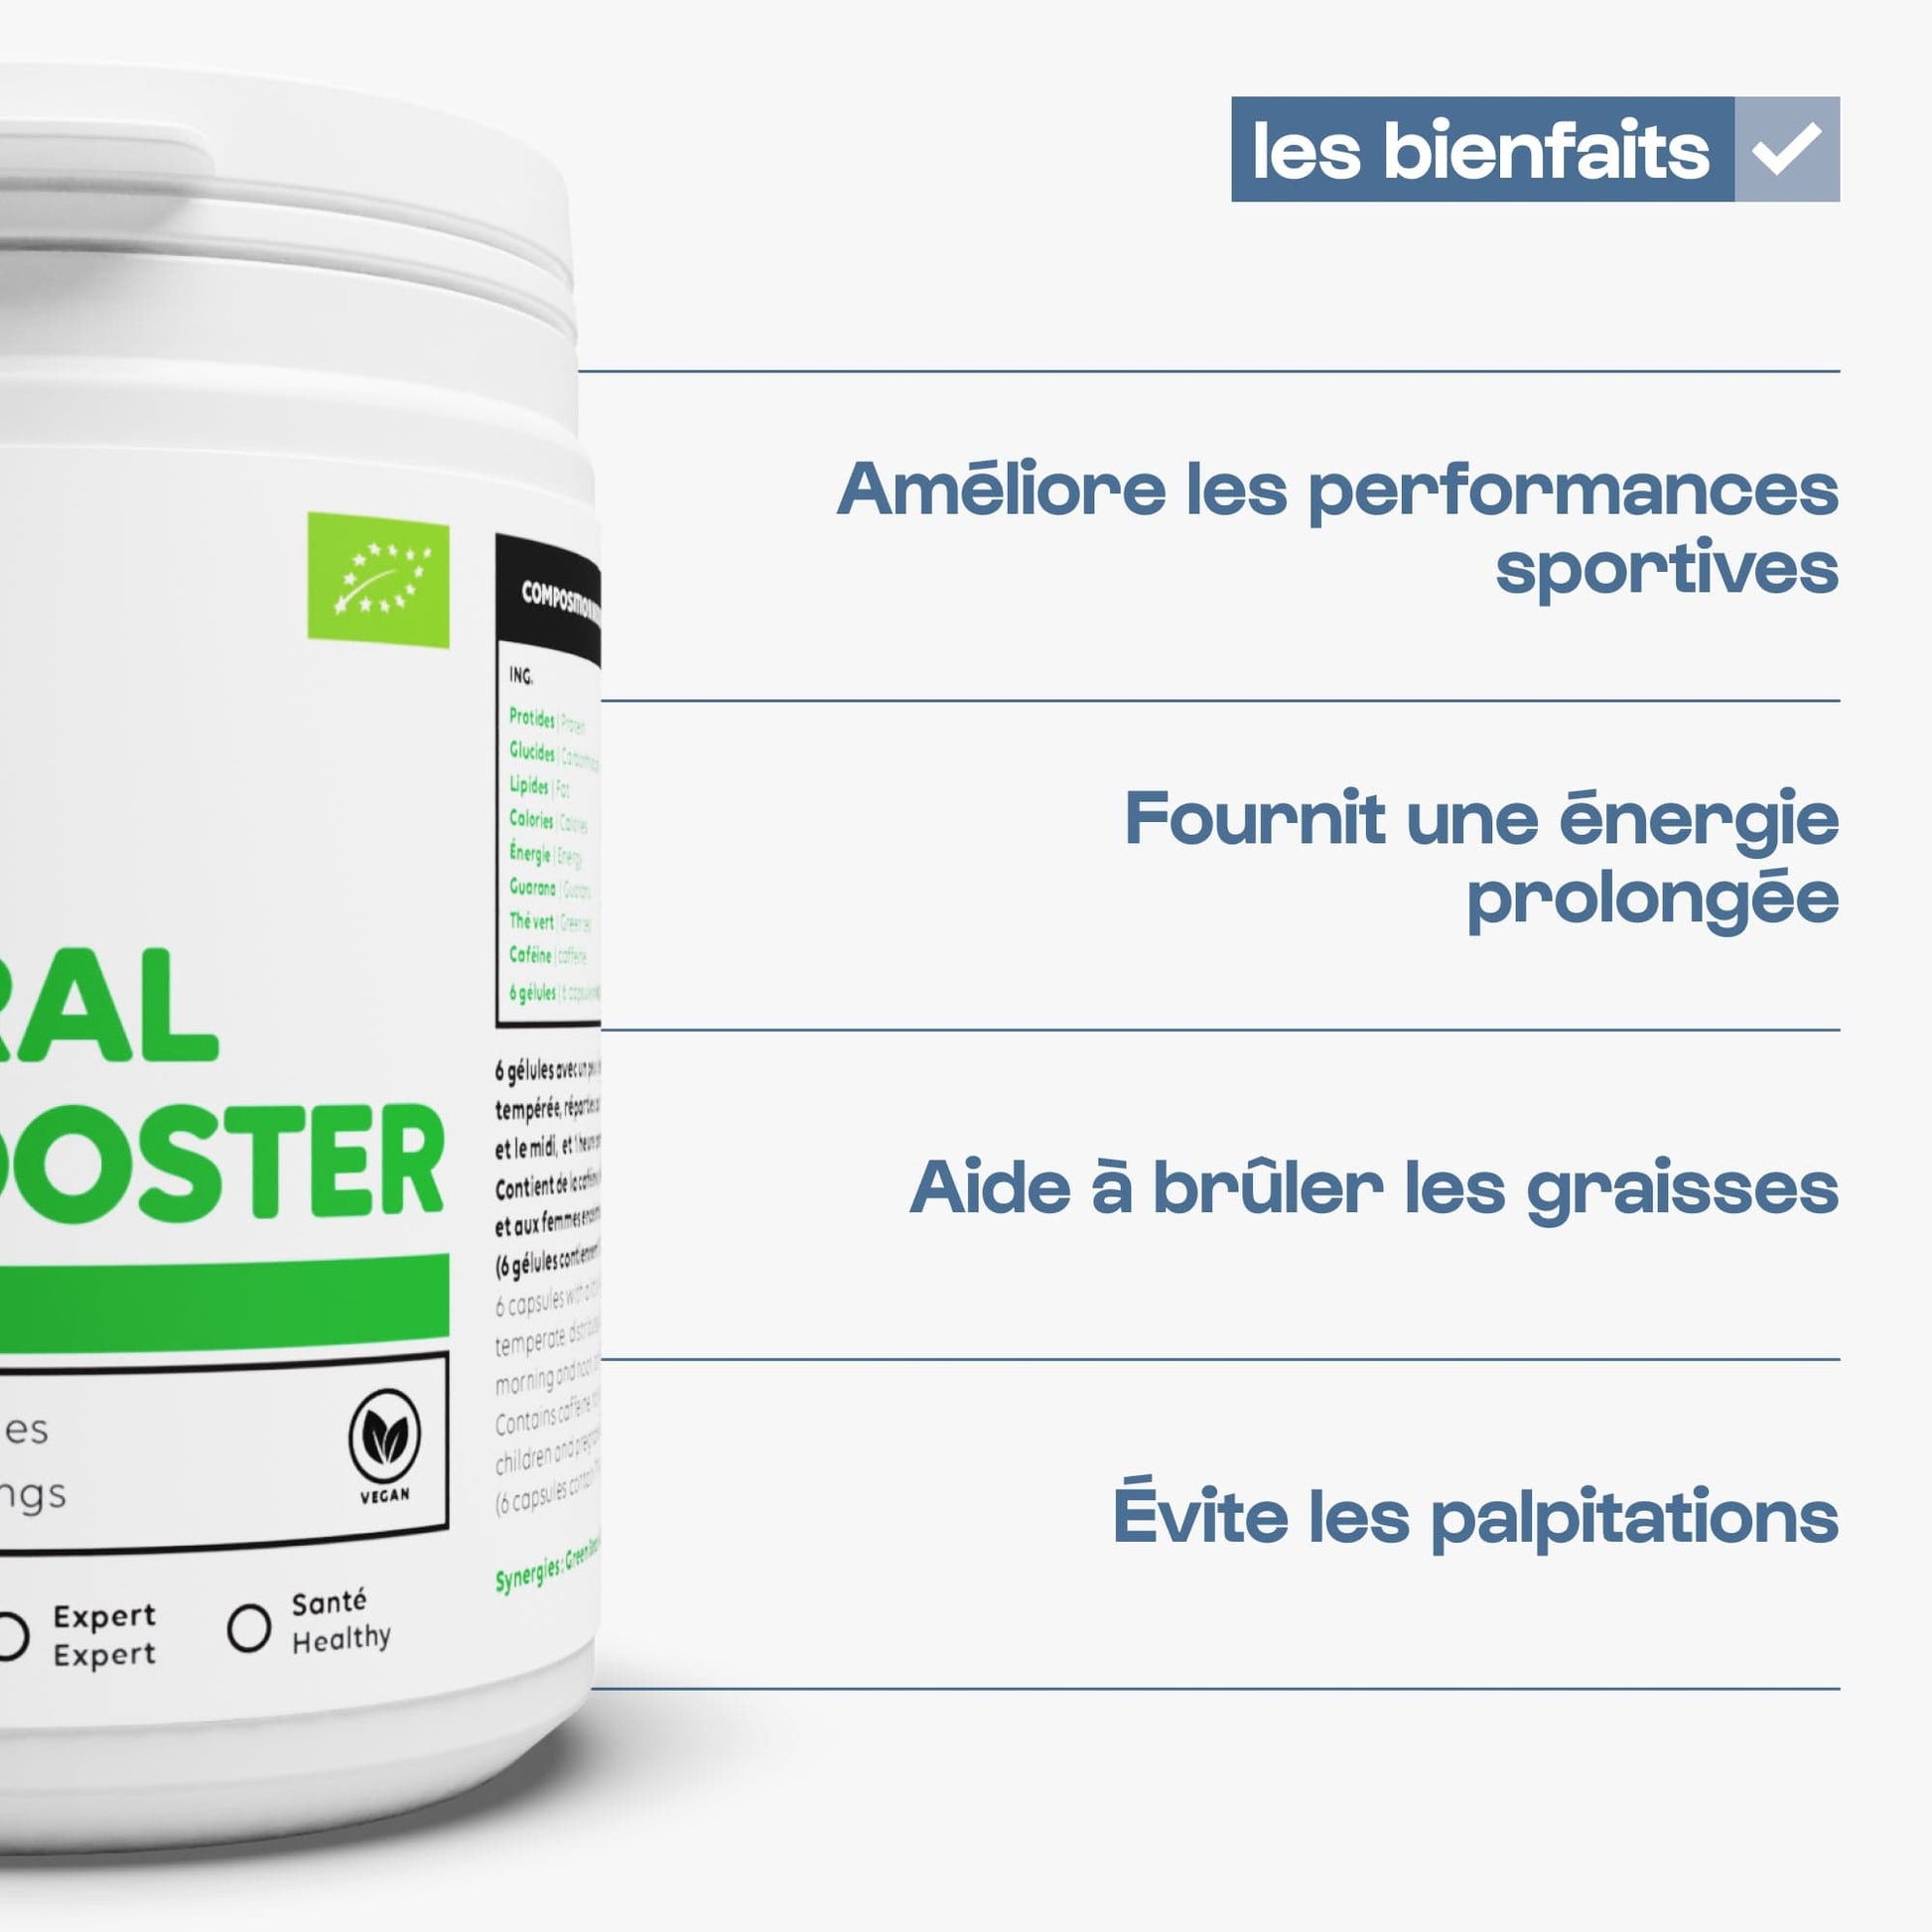 Nutrimuscle Plantes Natural Bio Booster